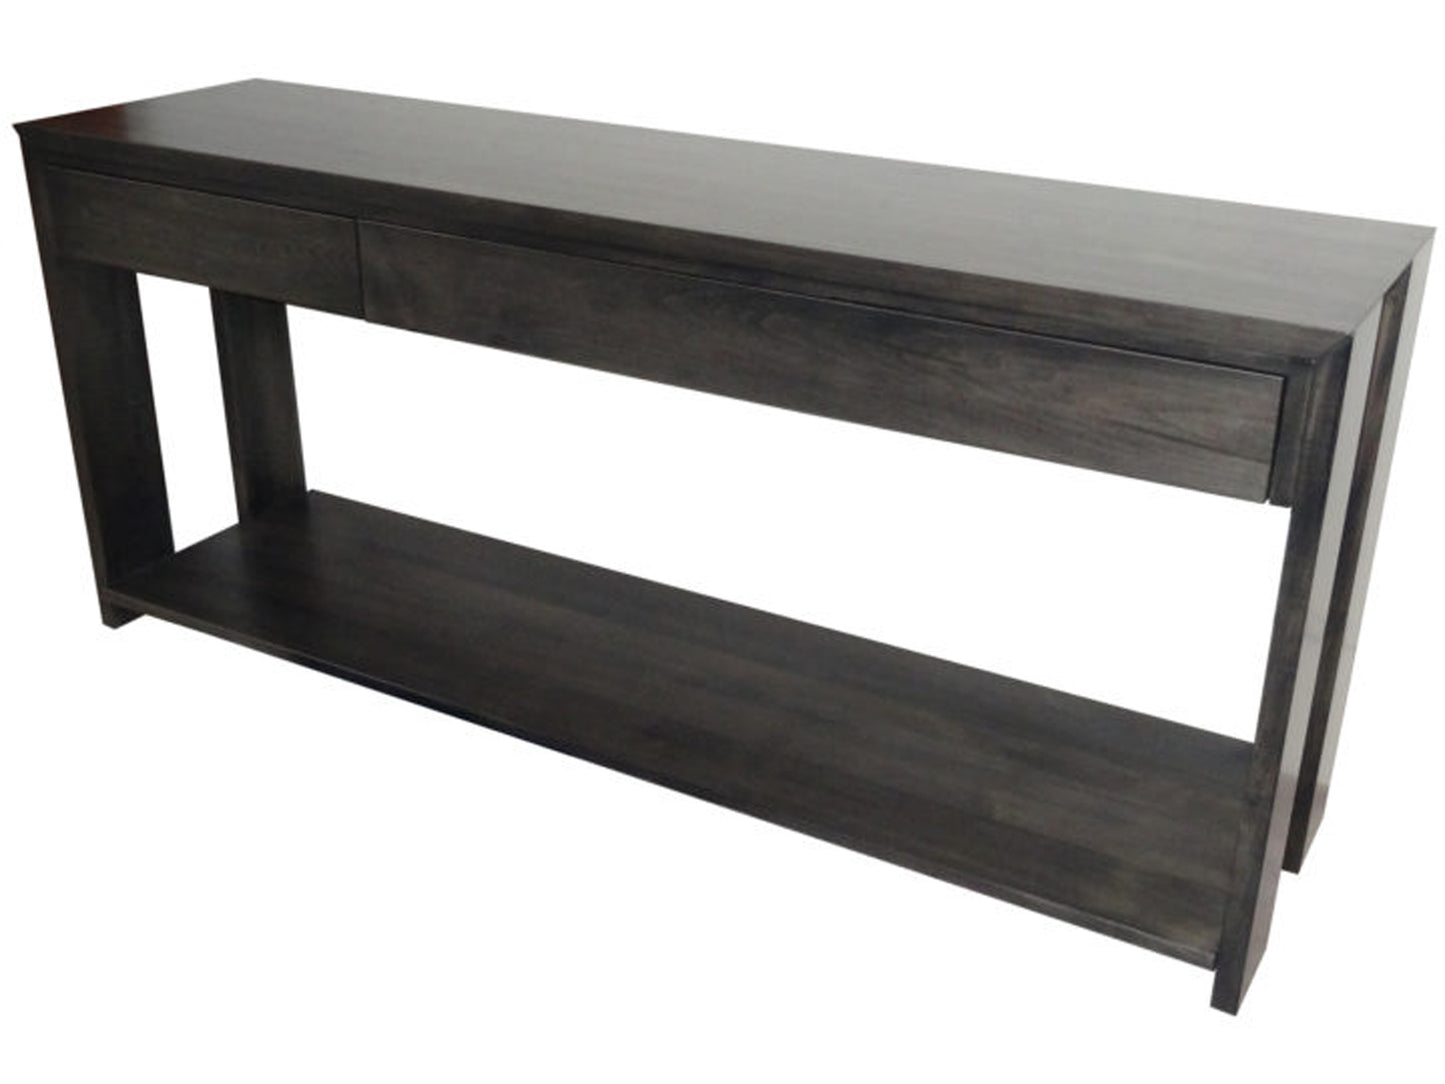 Chesterman Sofa Table this is an in-house design with custom sizes available, built in solid wood with many colour options